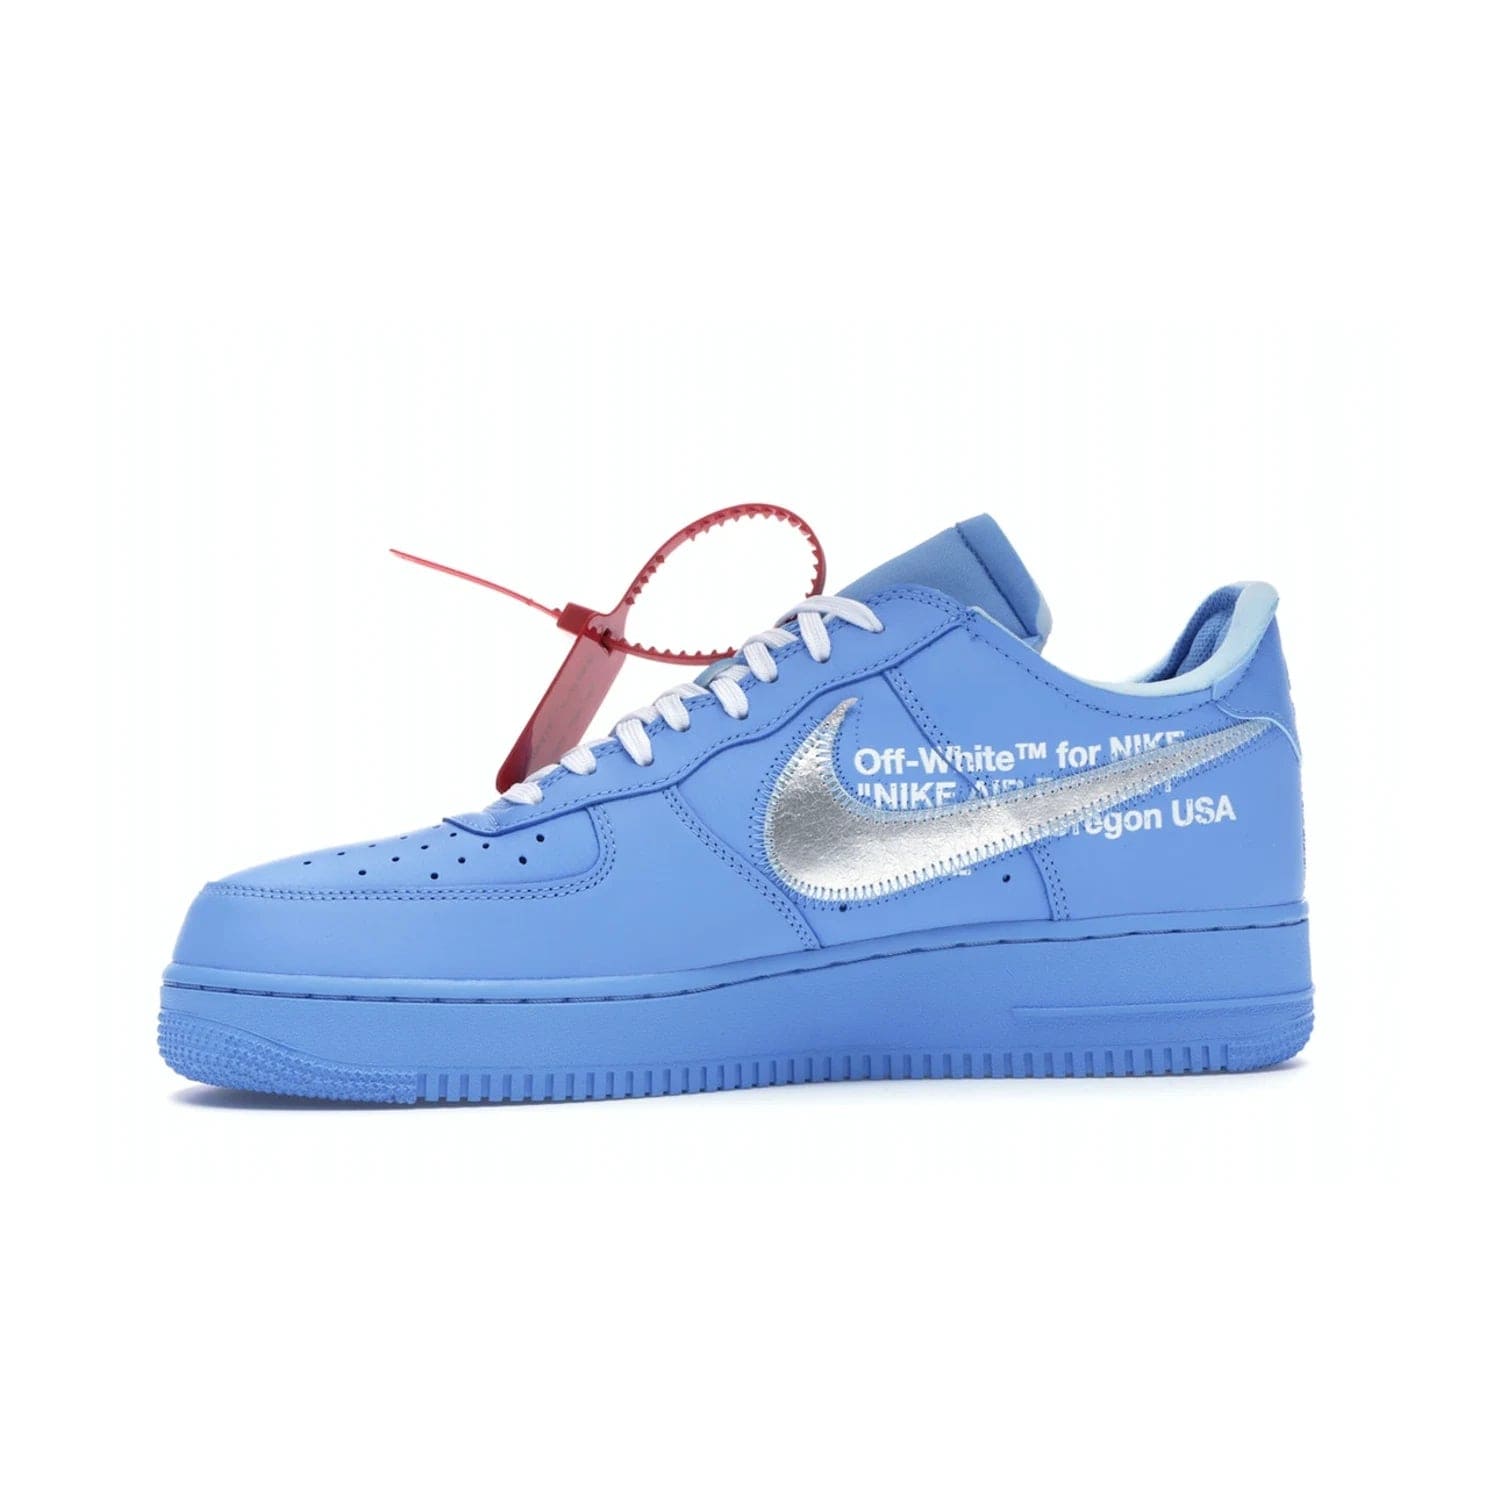 Nike Air Force 1 Low Off-White MCA University Blue - Image 18 - Only at www.BallersClubKickz.com - Virgil Abloh's Air Force 1 Low Off-White MCA University Blue: Features University Blue leather and midsole, reflective silver Nike Swoosh, red zip tie, white laces, and iconic Off-White™ branding. A must-have for any Virgil Abloh enthusiast.